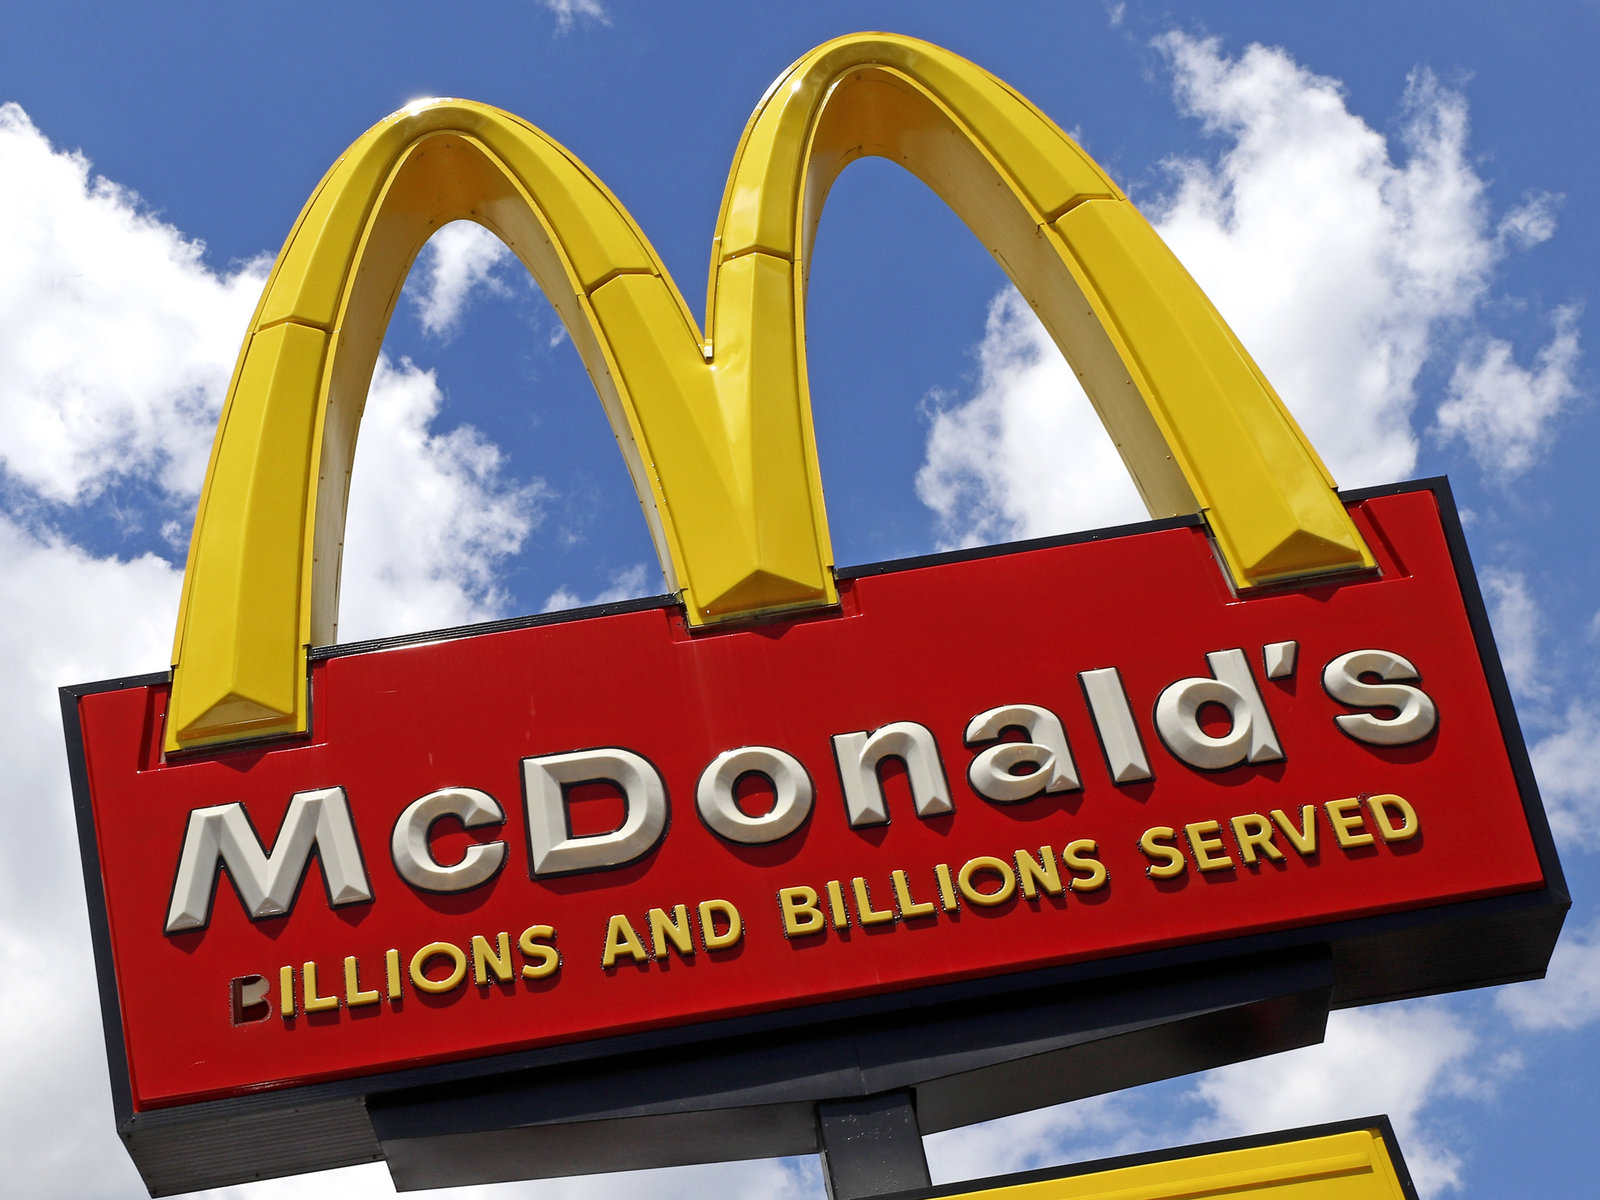 photo of McDonald's logo at an angle, blue sky with small white clouds in the background